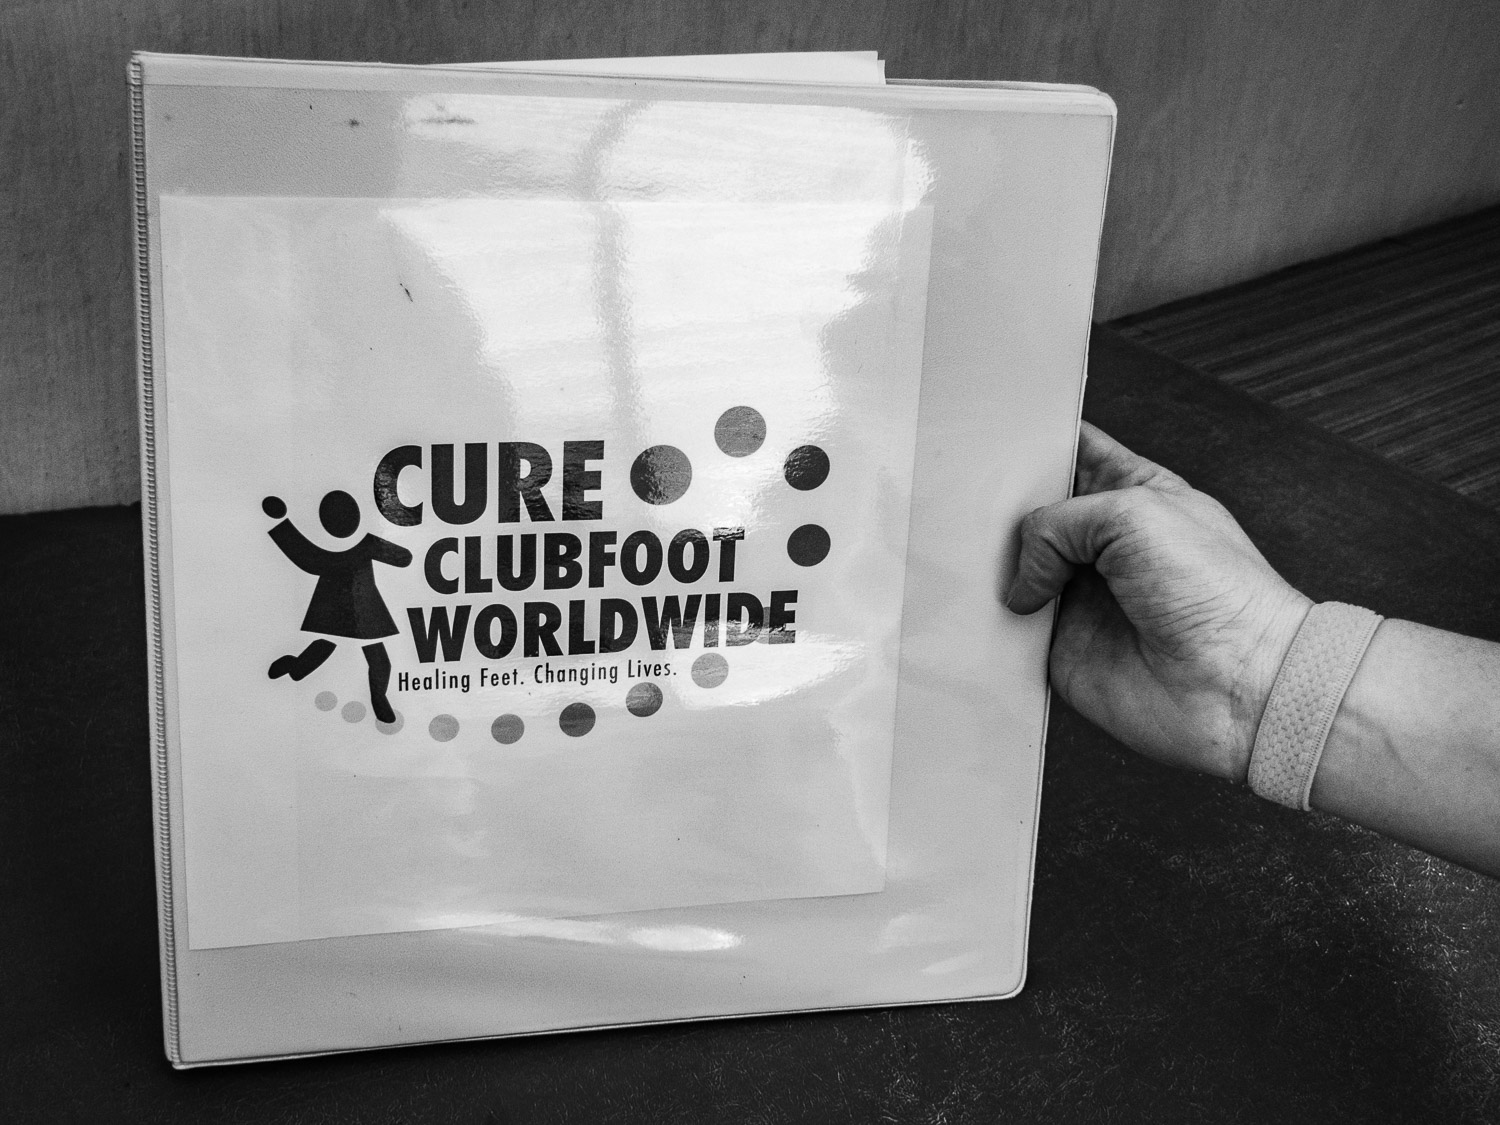  Data was reported to the worldwide CURE clubfoot program. 